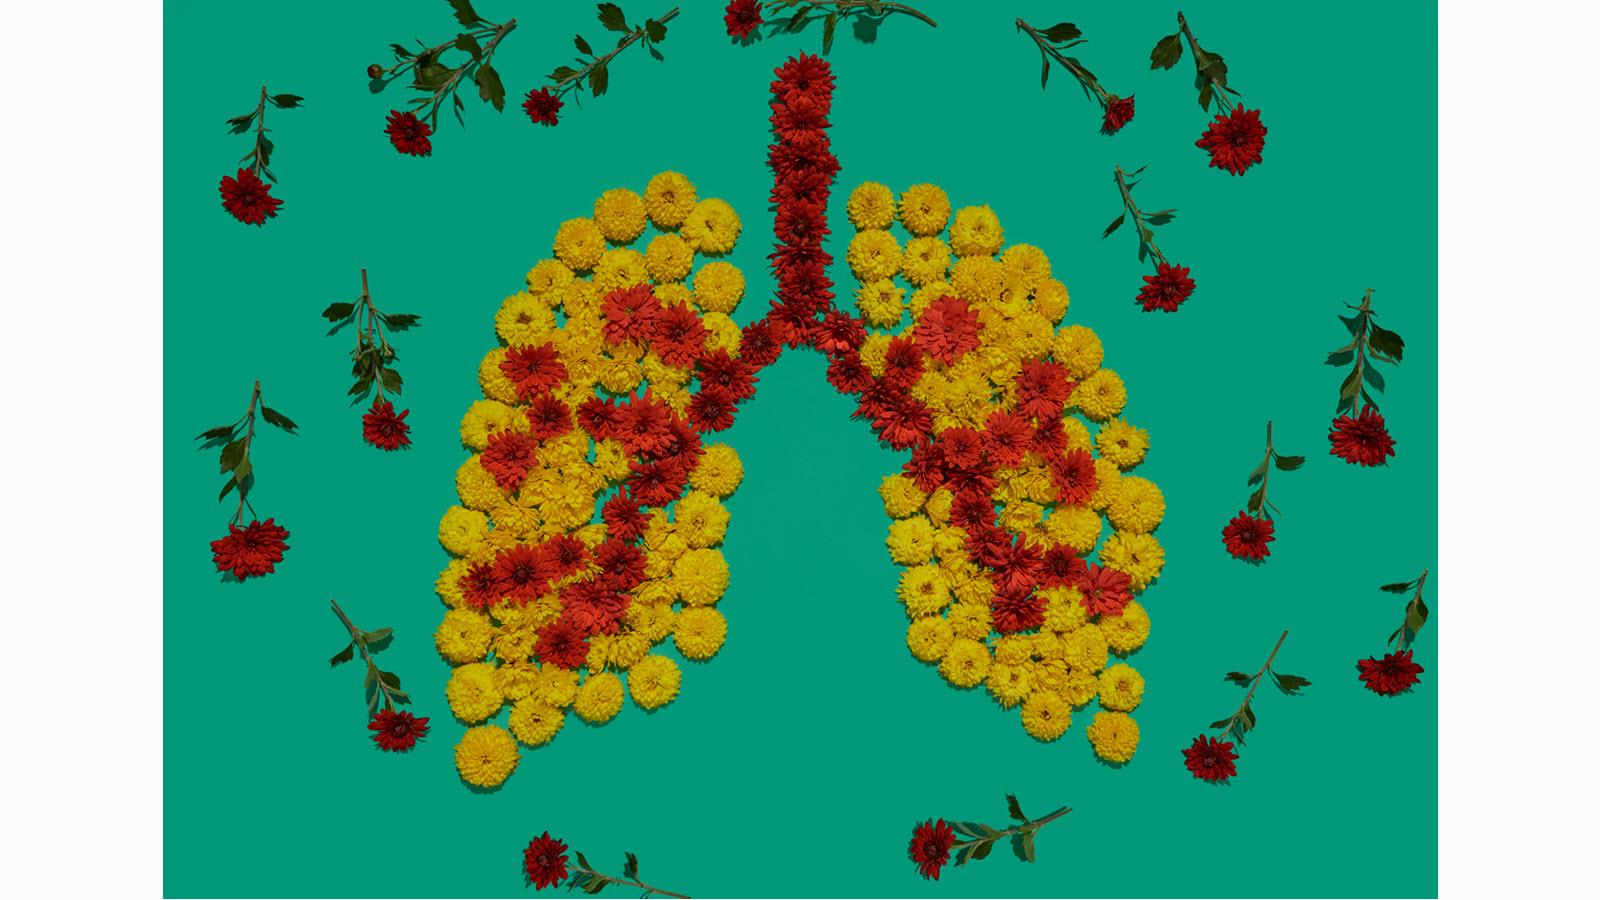 illustration of the lungs, trachea and bronchial tubes in yellow and red flowers